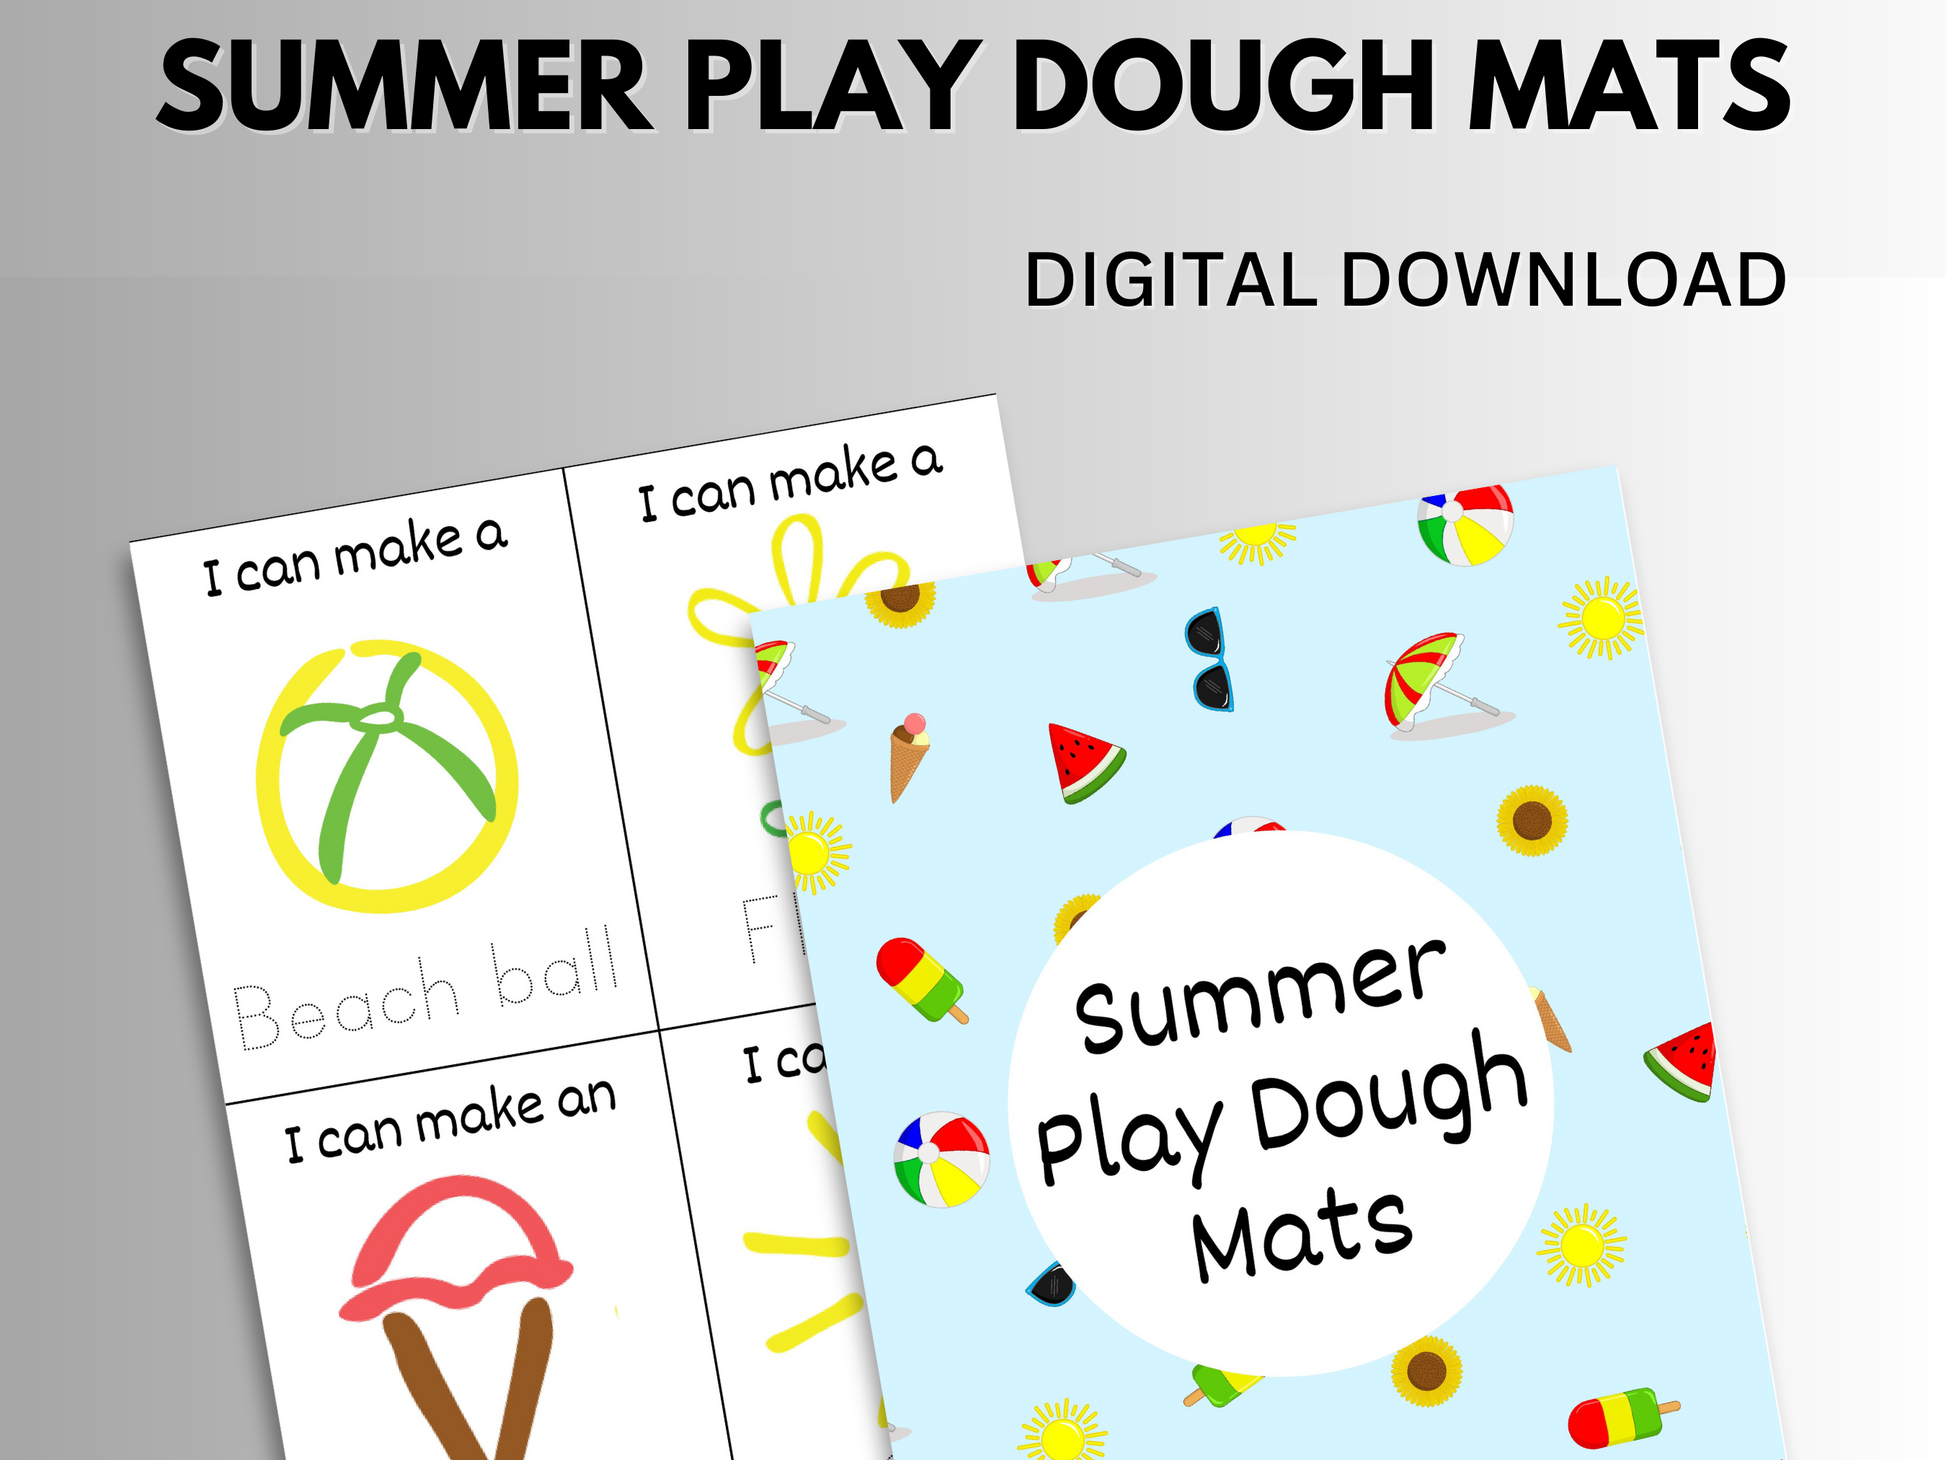 Summer play dough mats digital download with 2 pages shown.